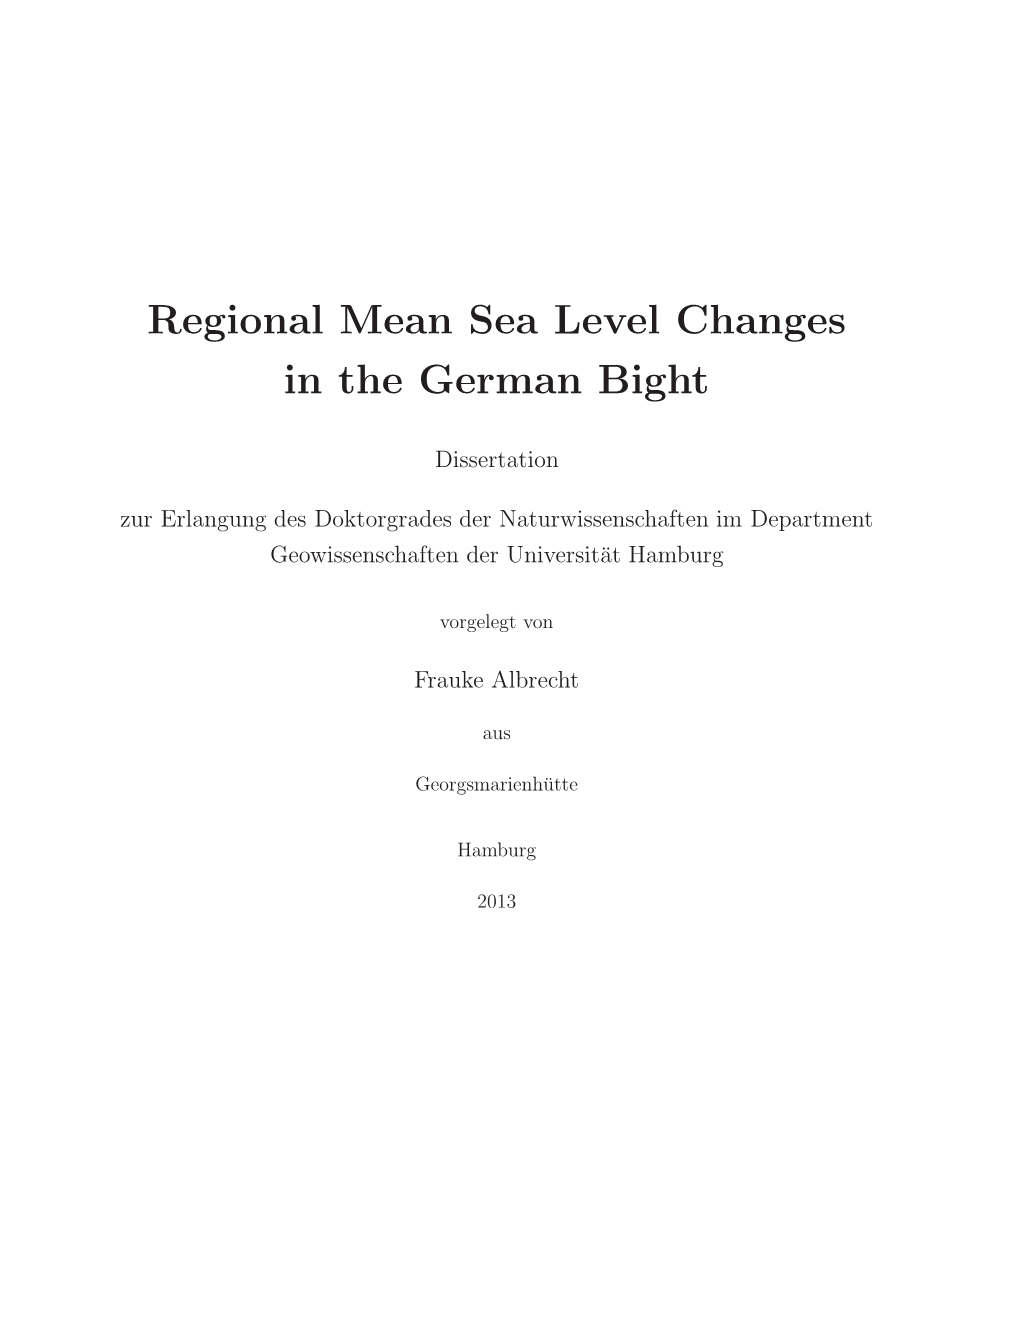 Regional Mean Sea Level Changes in the German Bight